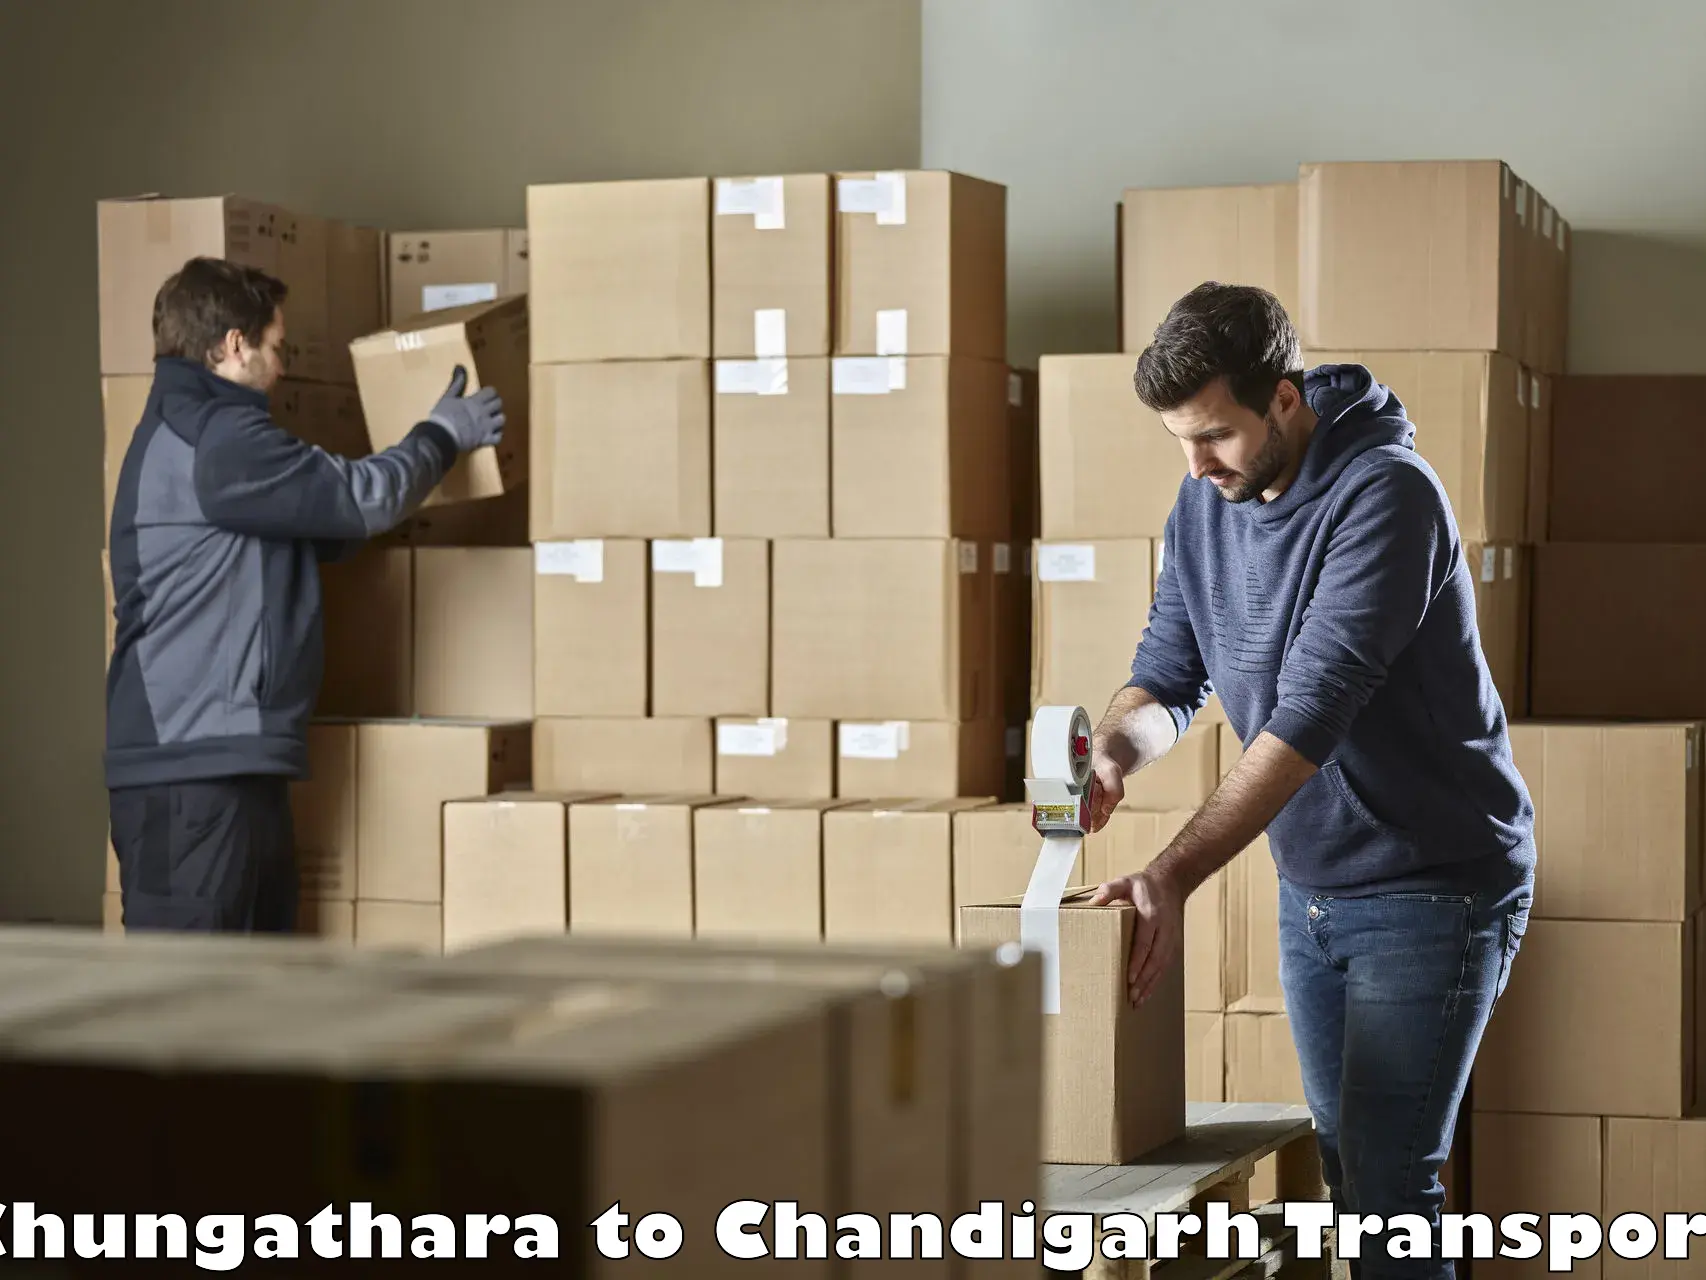 Air freight transport services in Chungathara to Chandigarh